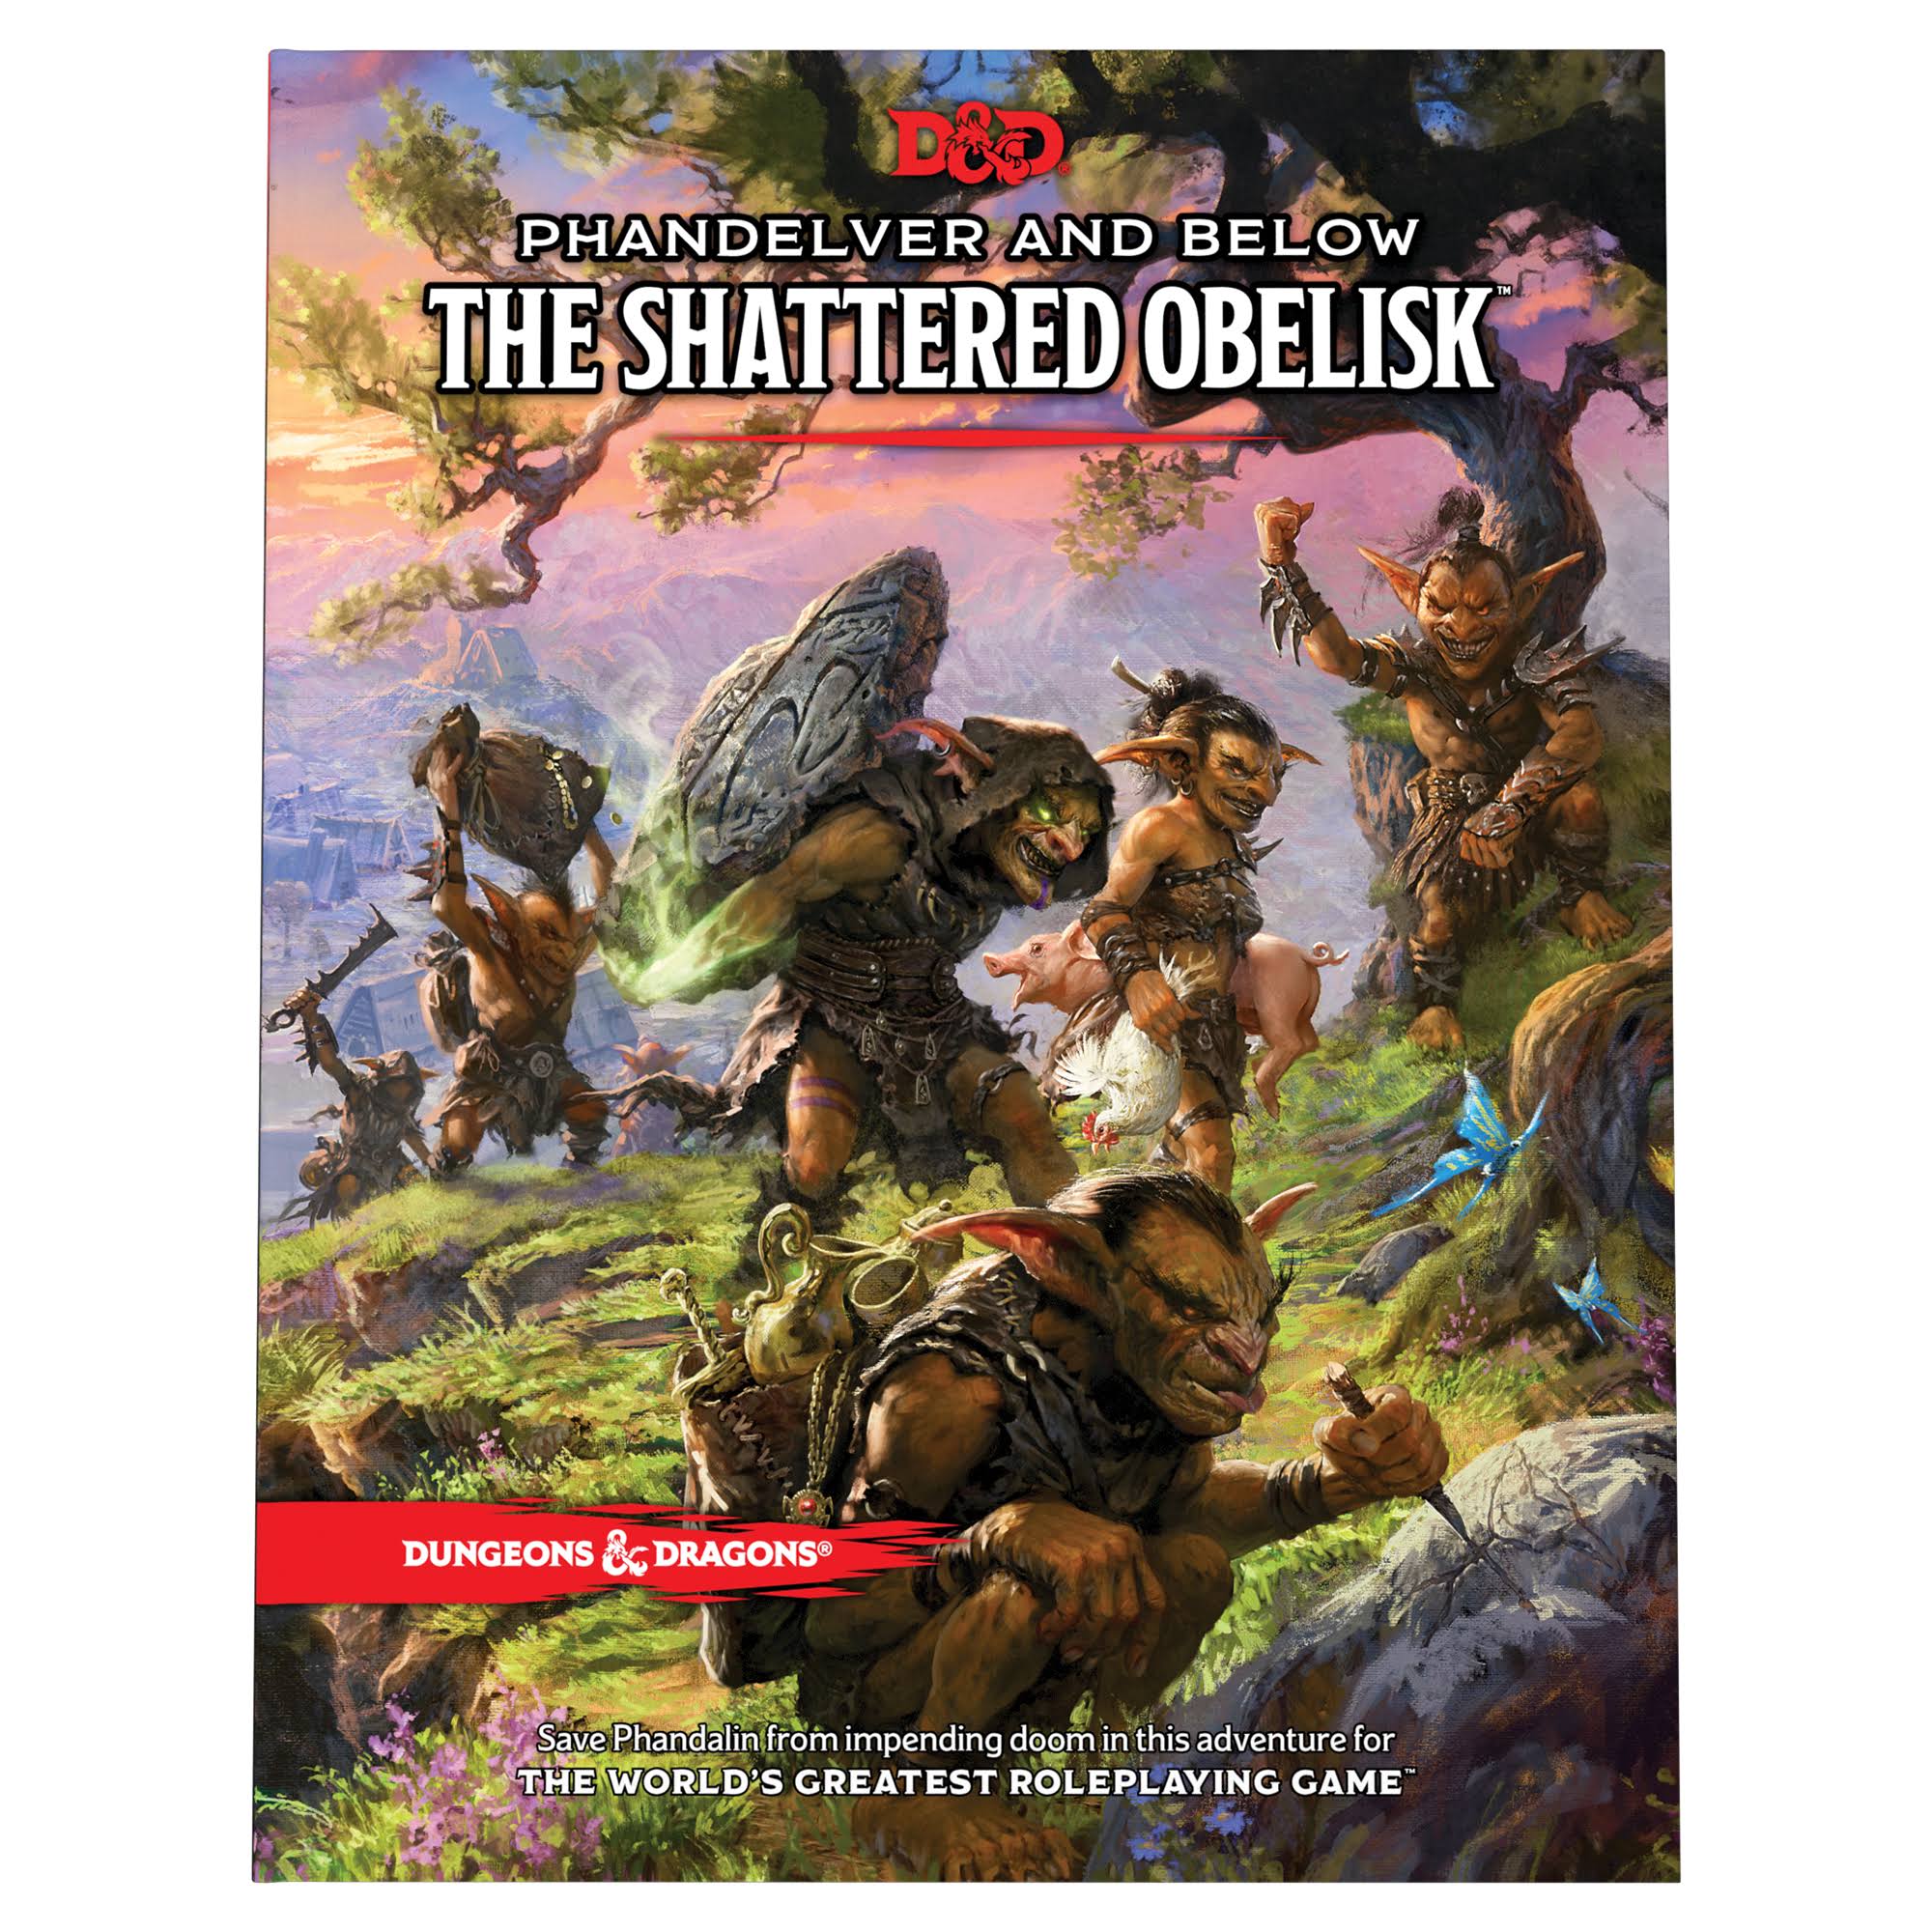 Dungeons & Dragons - 5th Edition - Phandelver and Below - The Shattered Obelisk (Pre-Order)